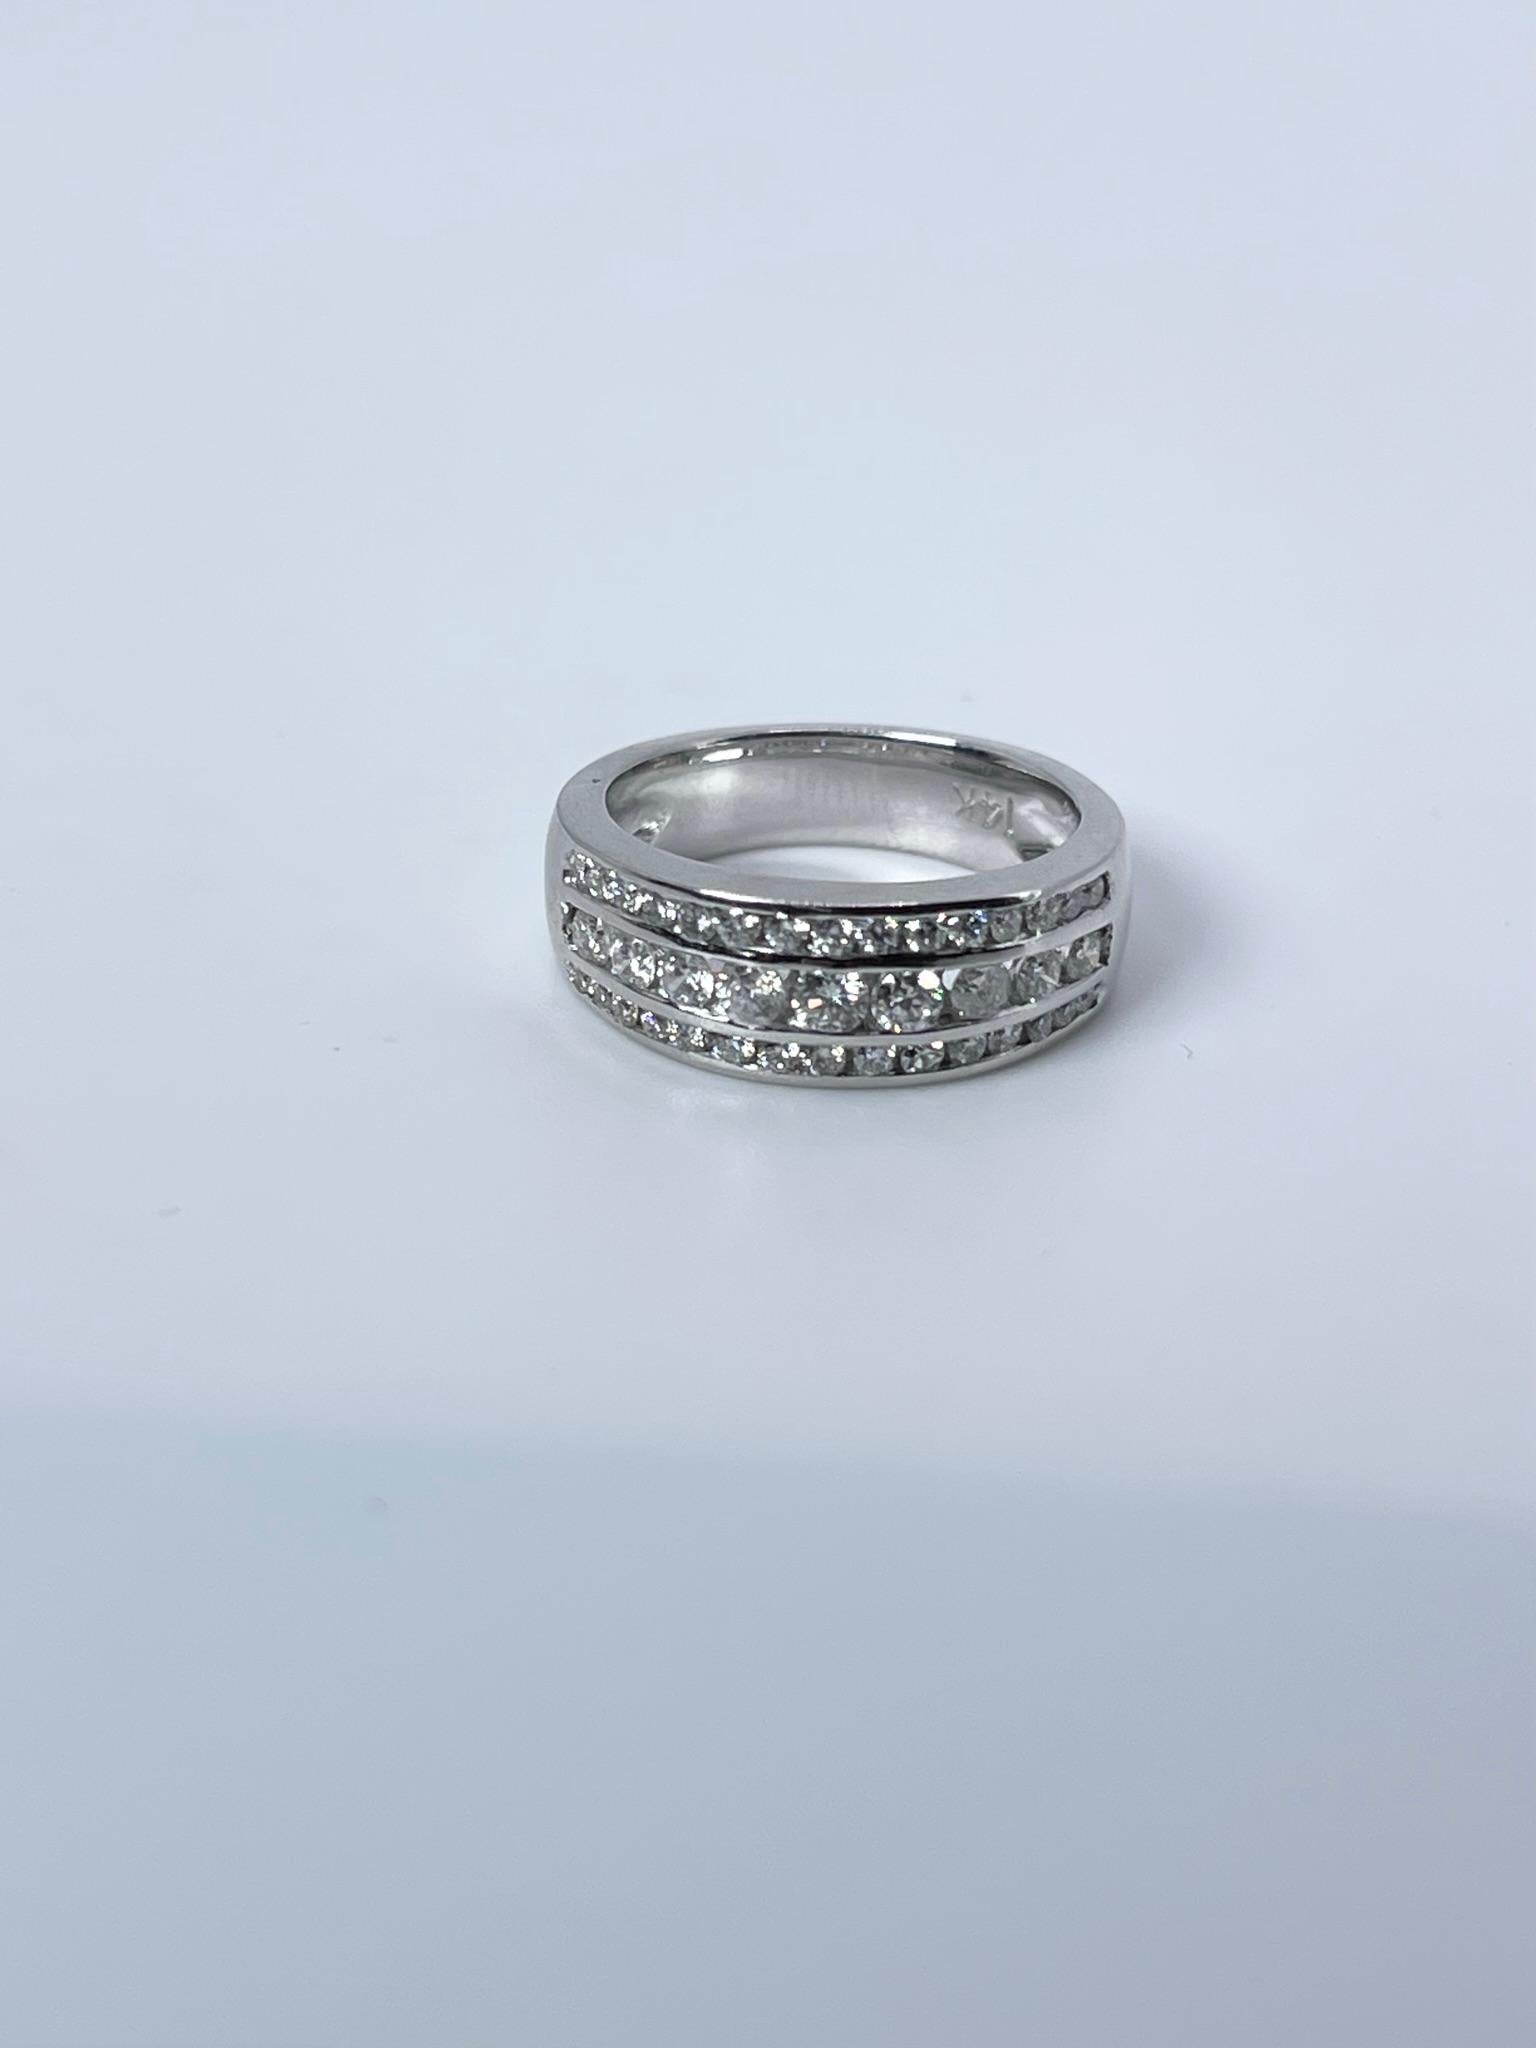 Wide wedding band 14KT white gold channel set diamond ring.
ITEM#: FPP 130-00023
GRAM WEIGHT: 7.71gr
METAL: 14KT

NATURAL DIAMOND(S)
Cut: Round Brilliant
Color: F-G
Clarity: VS-SI 
Carat: 0.75ct
Size: 6.5 ( can be re-sized)


WHAT YOU GET AT STAMPAR